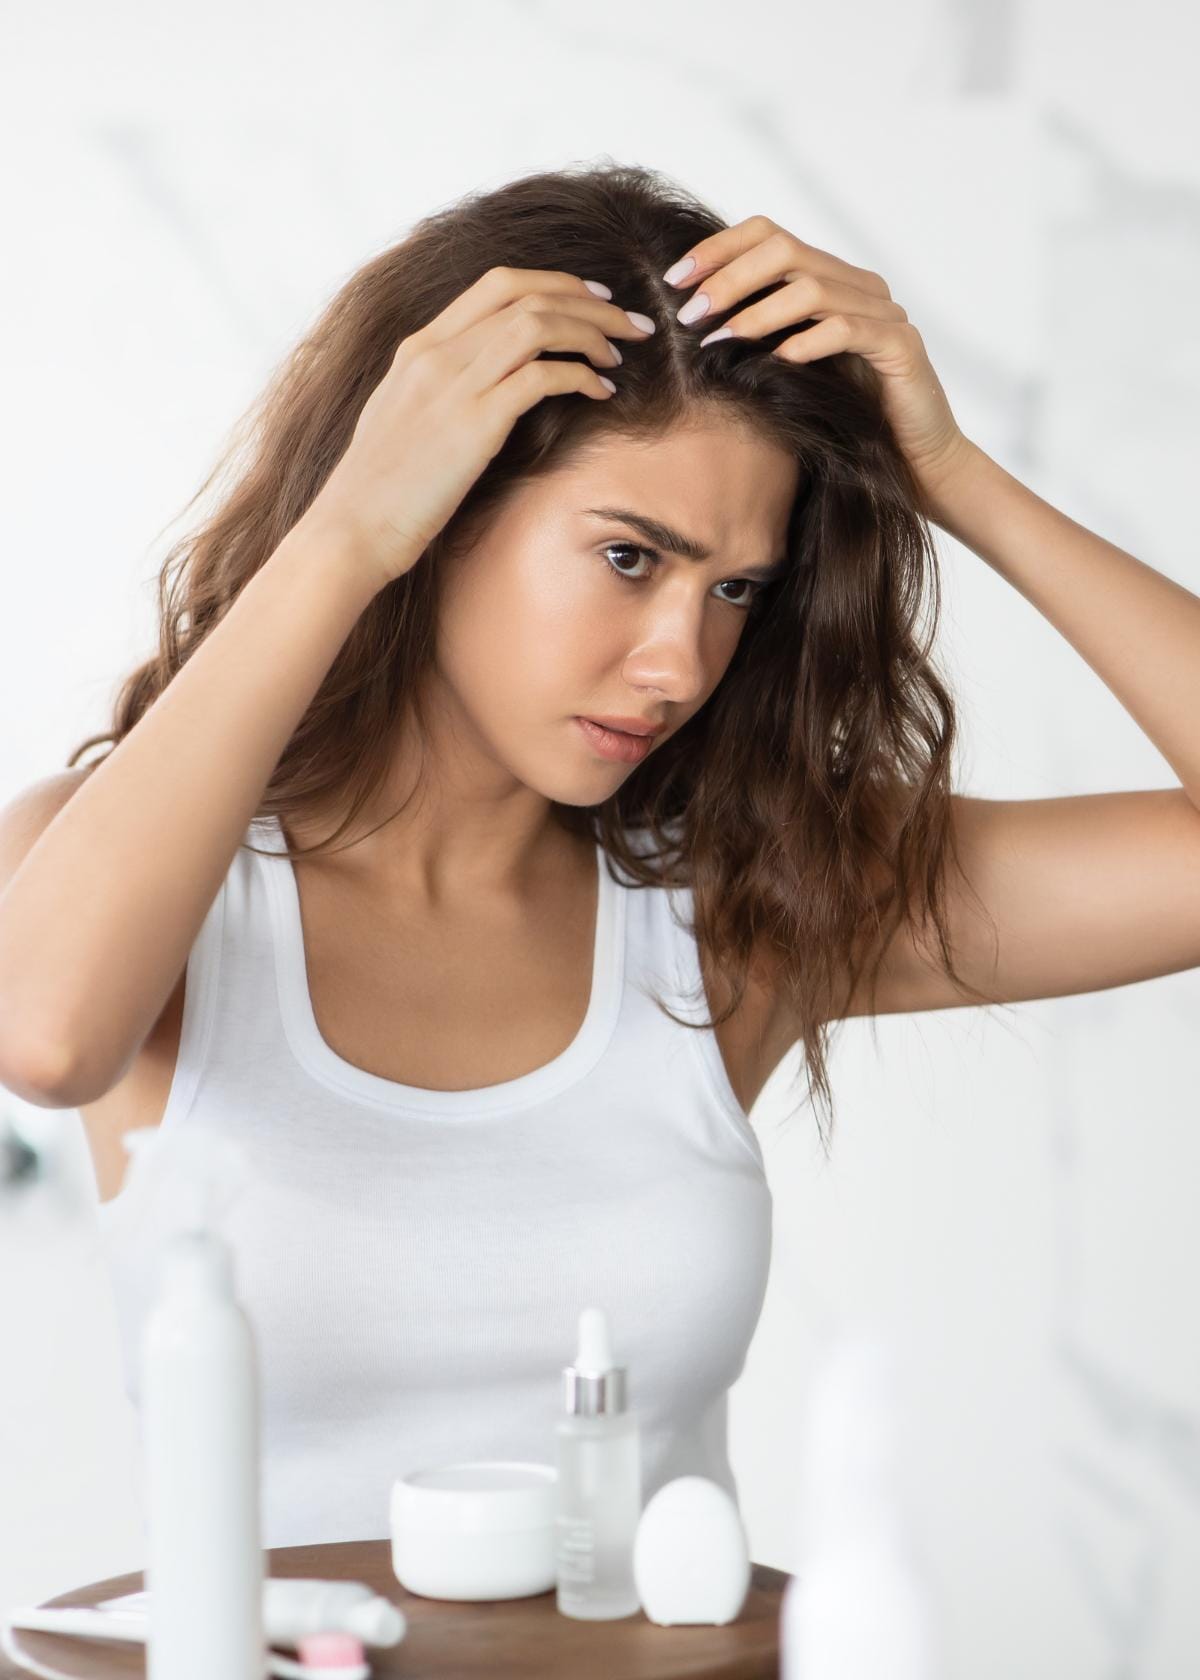 How Long Does It Take for Dandruff Shampoo to Work? Flake-Free Timeline